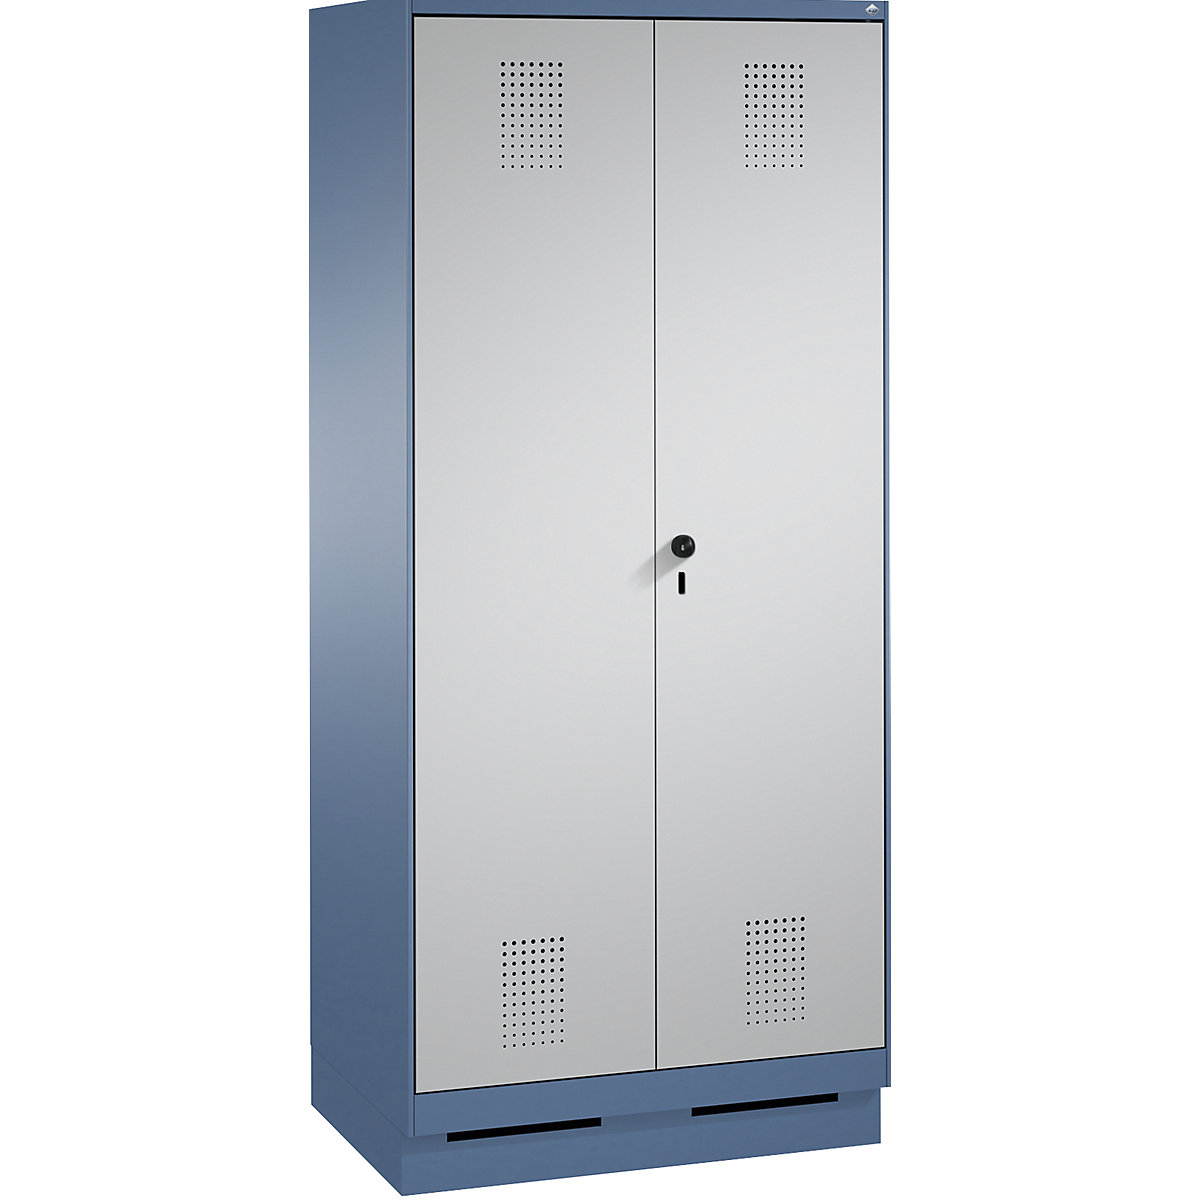 EVOLO storage cupboard, doors close in the middle, with plinth – C+P, 2 compartments, compartment width 400 mm, with 8 shelves, distant blue / white aluminium-16